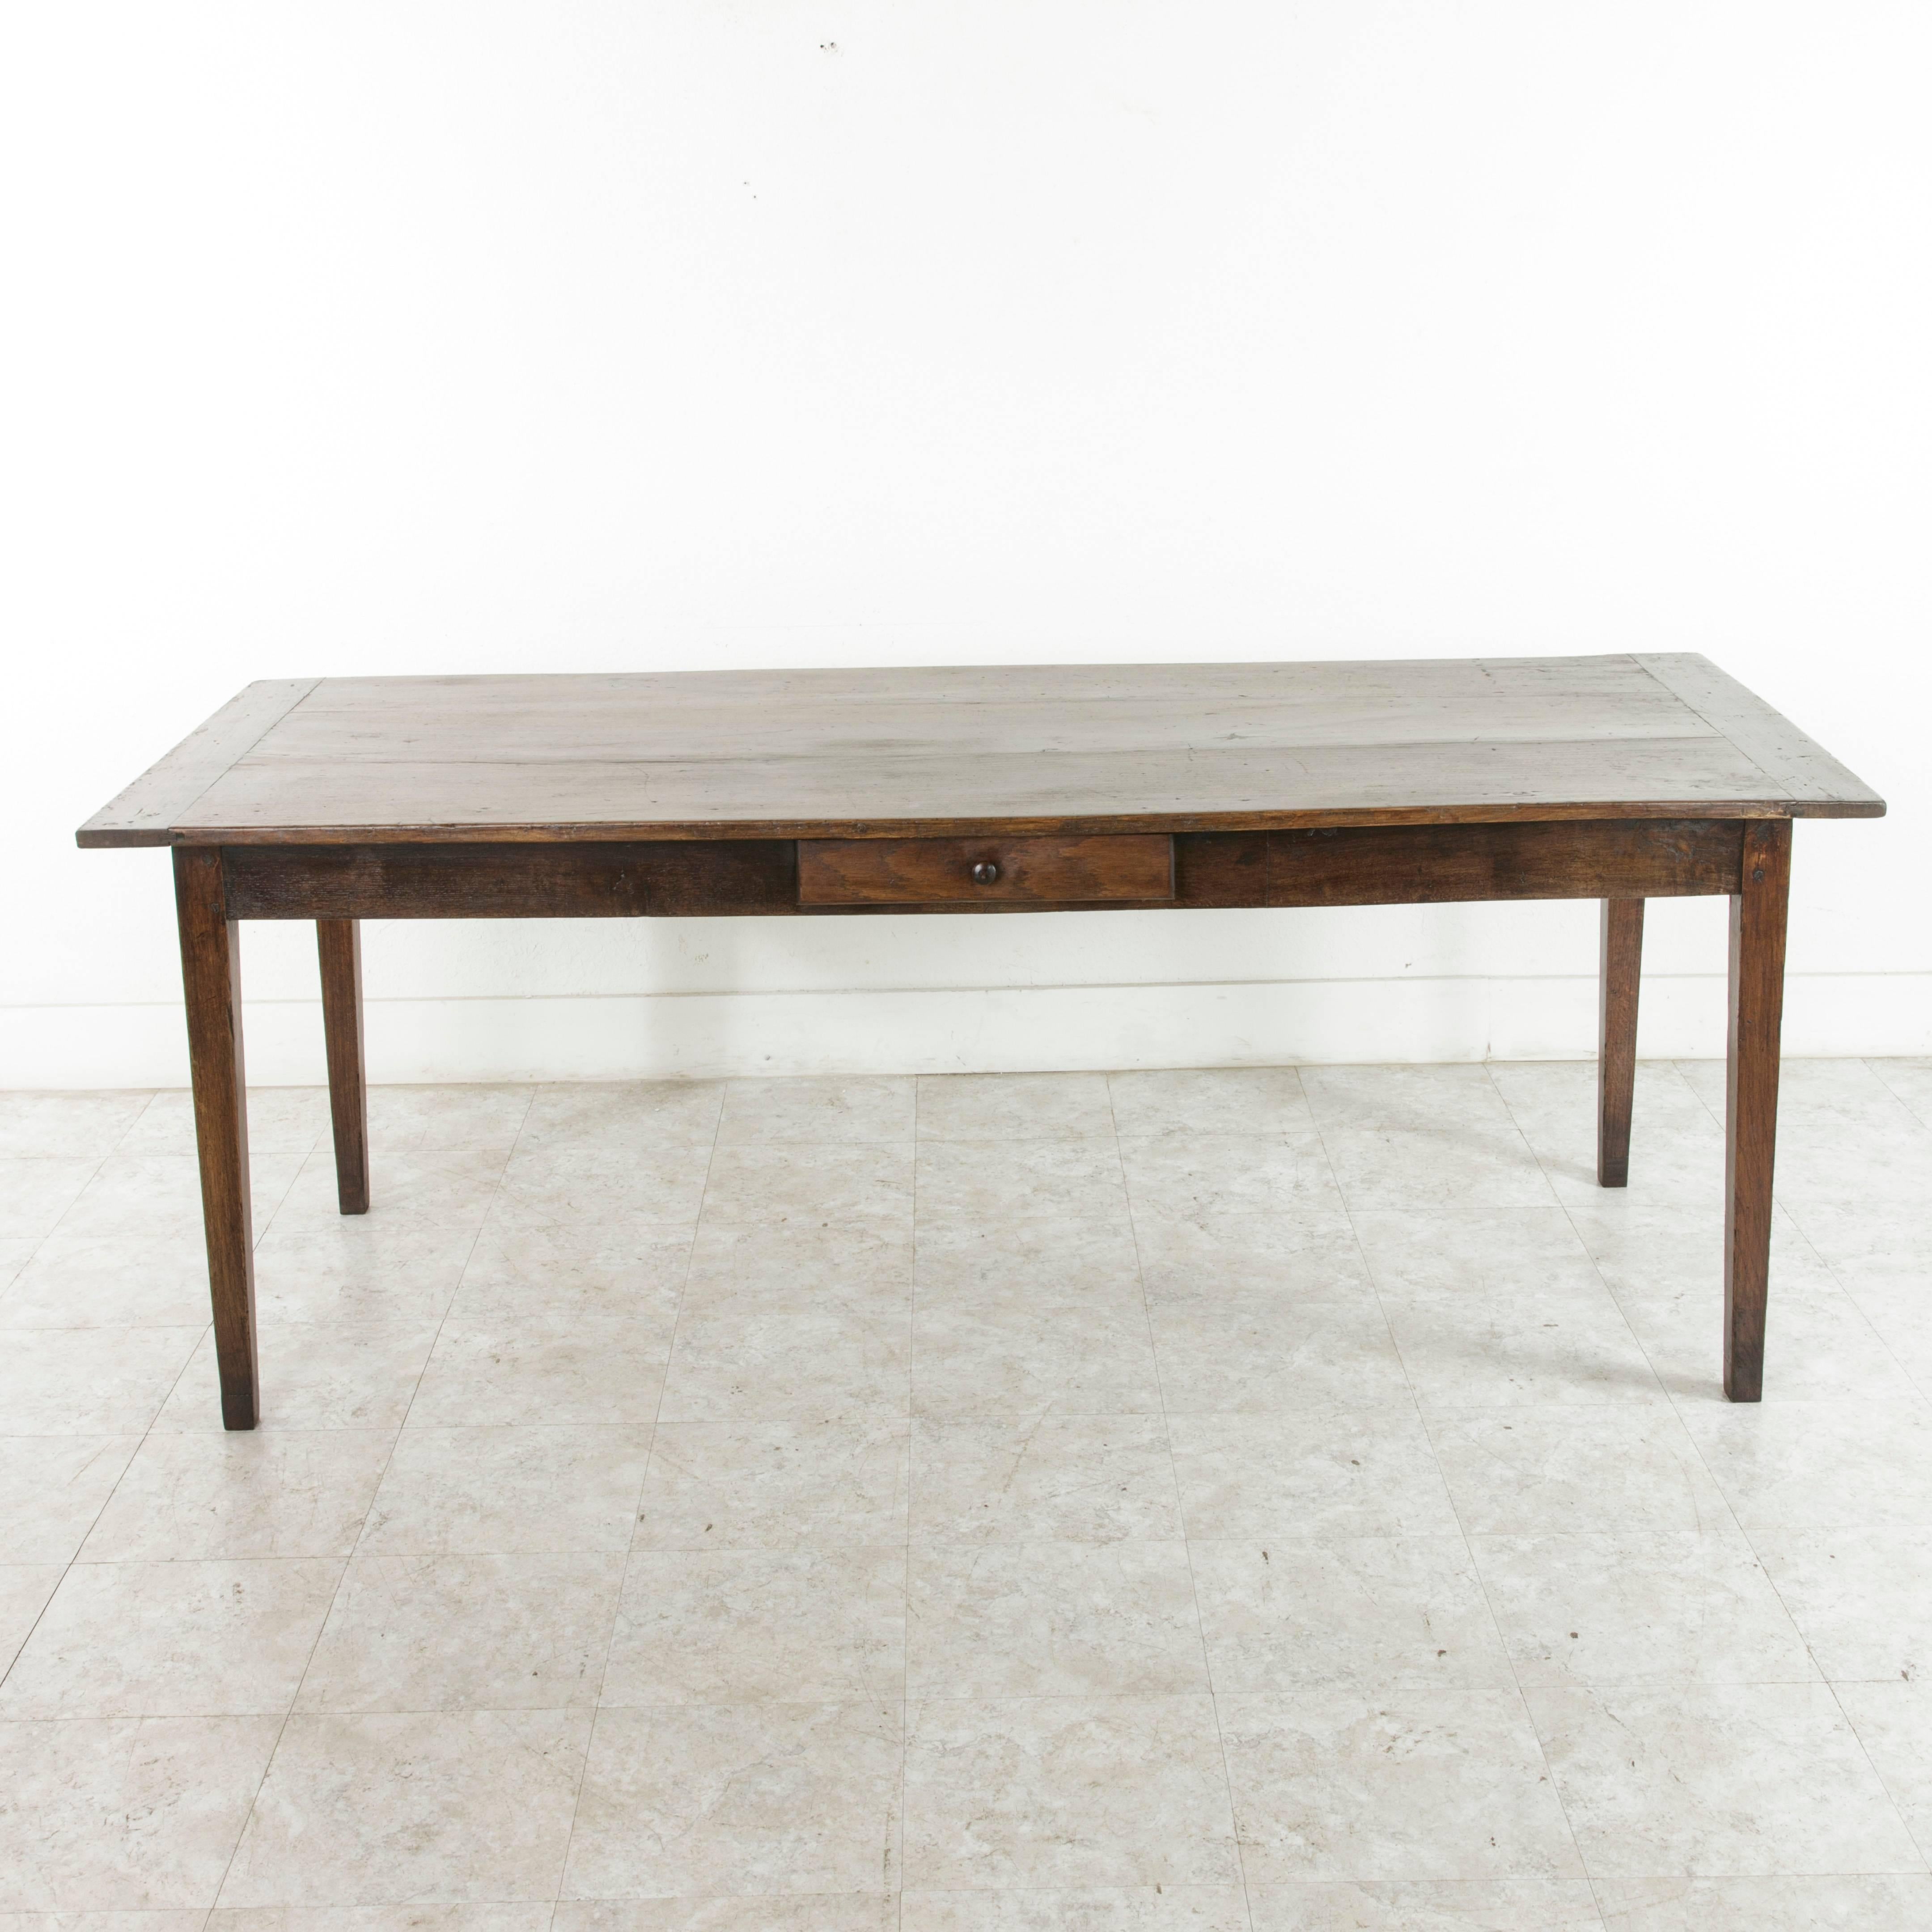 This artisan-made hand pegged poplar farm table or dining table is from Le Perche, a Sub-region of Normandy, France. Its top is constructed of three wide planks and rests on gently tapered legs. Its single drawer on one side was originally used to